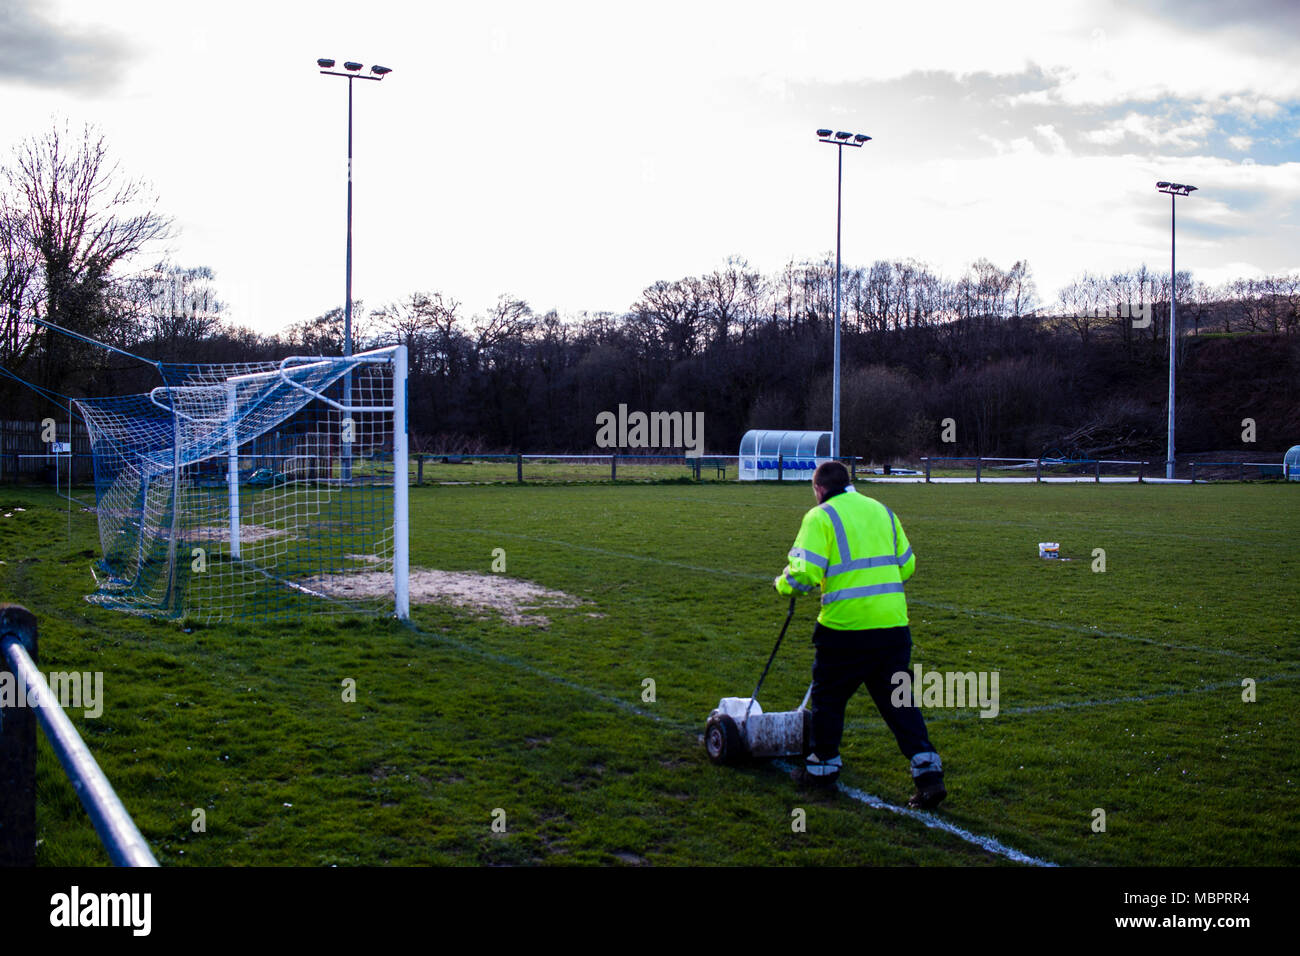 Cwmamman United's Groundsman paints the pitch marking before kick off. Cwmamman United 2-2 Port Talbot Town. Stock Photo